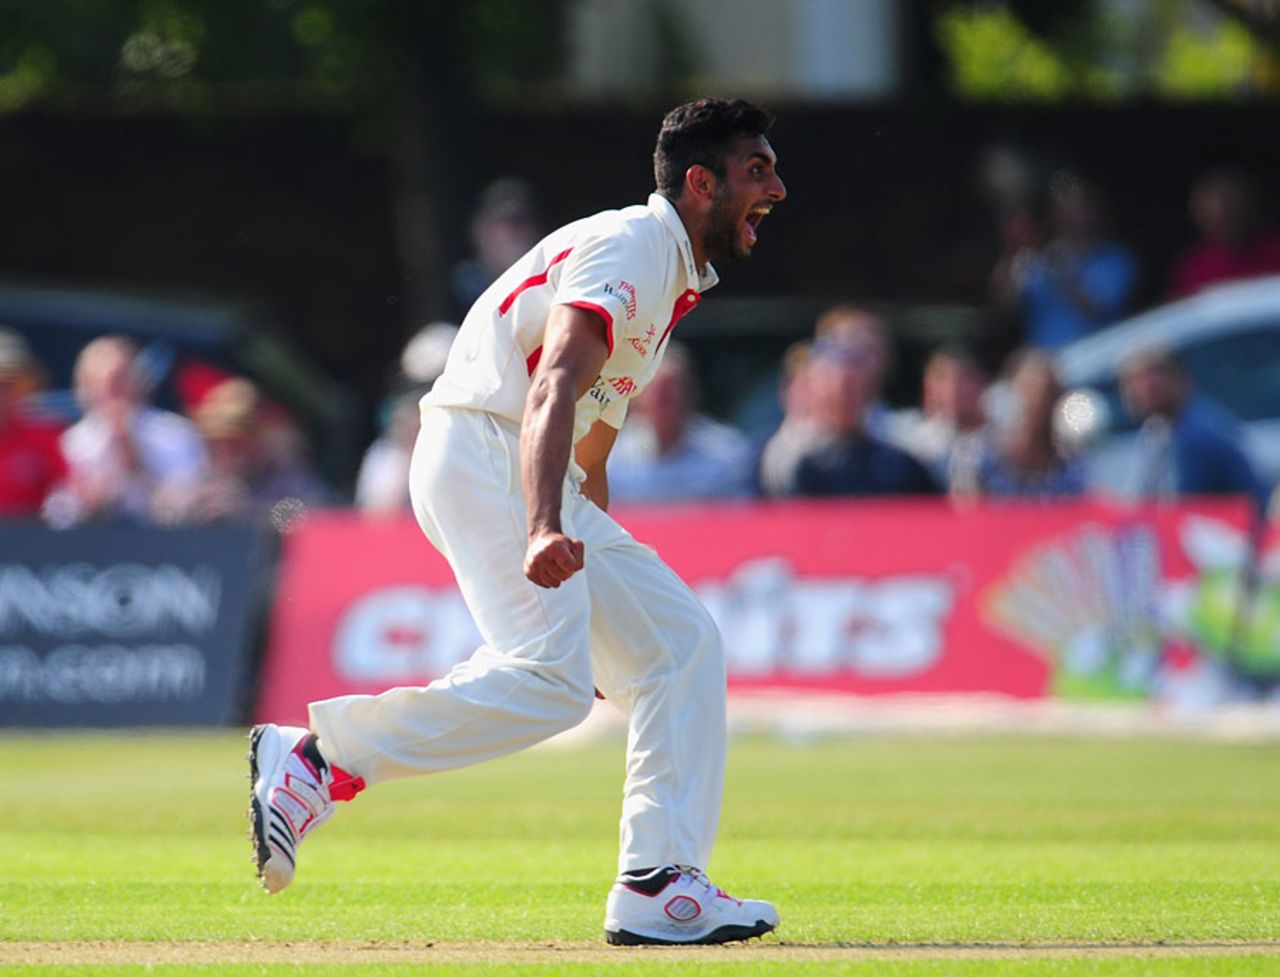 Ajmal Shahzad celebrates one of his important wickets, Lancashire v Middlesex, County Championship, Division One, Aigburth, May 24, 2012